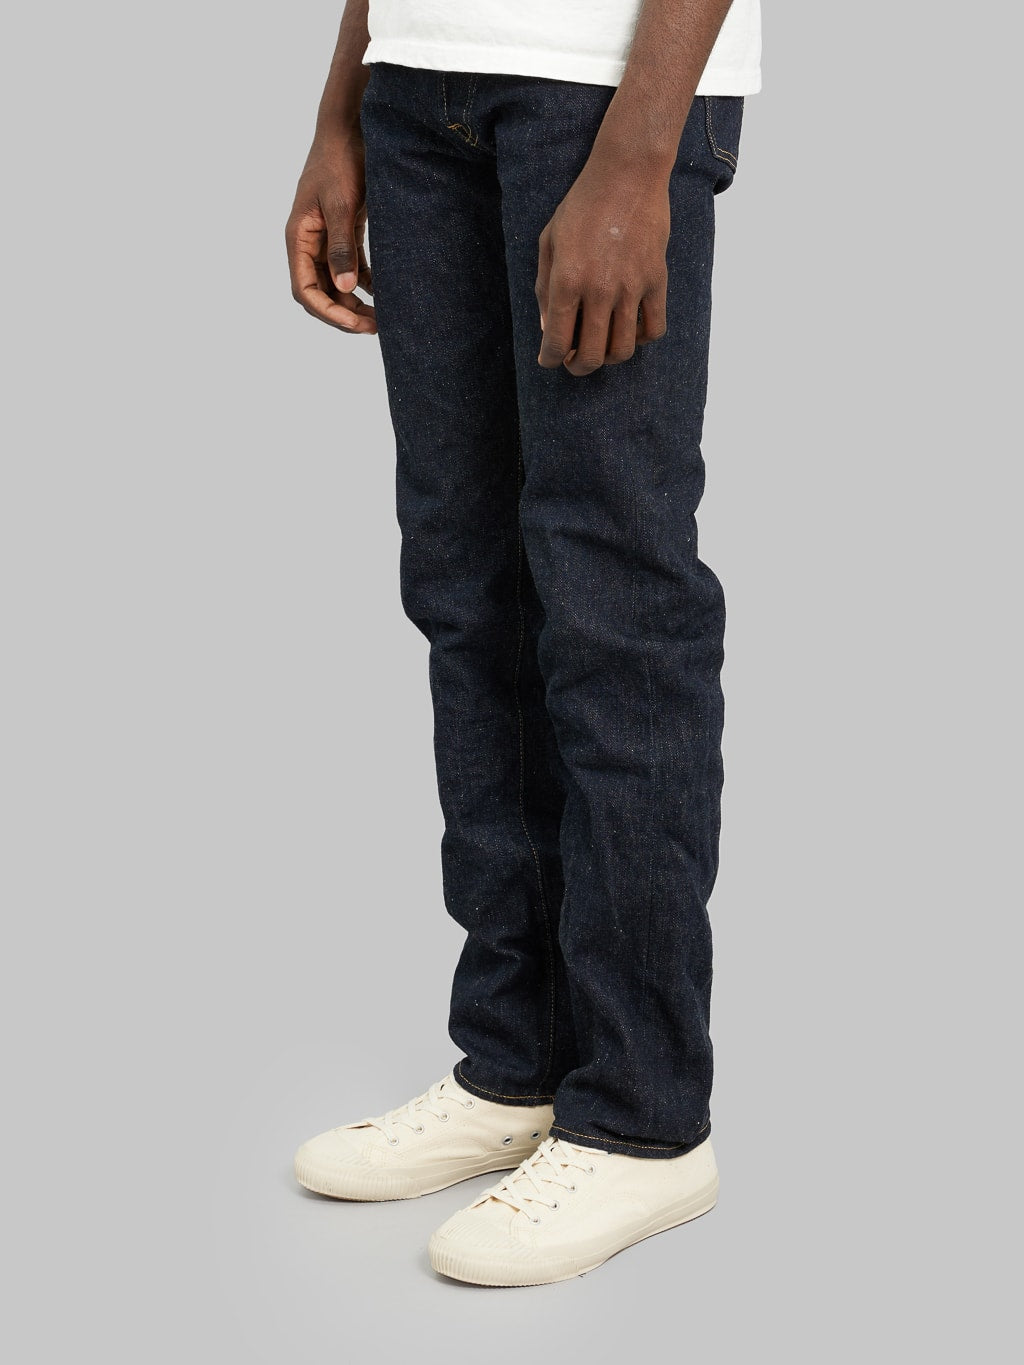 ONI 525 Natural Indigo Rope Dyeing Denim Classic Straight Jeans side fit